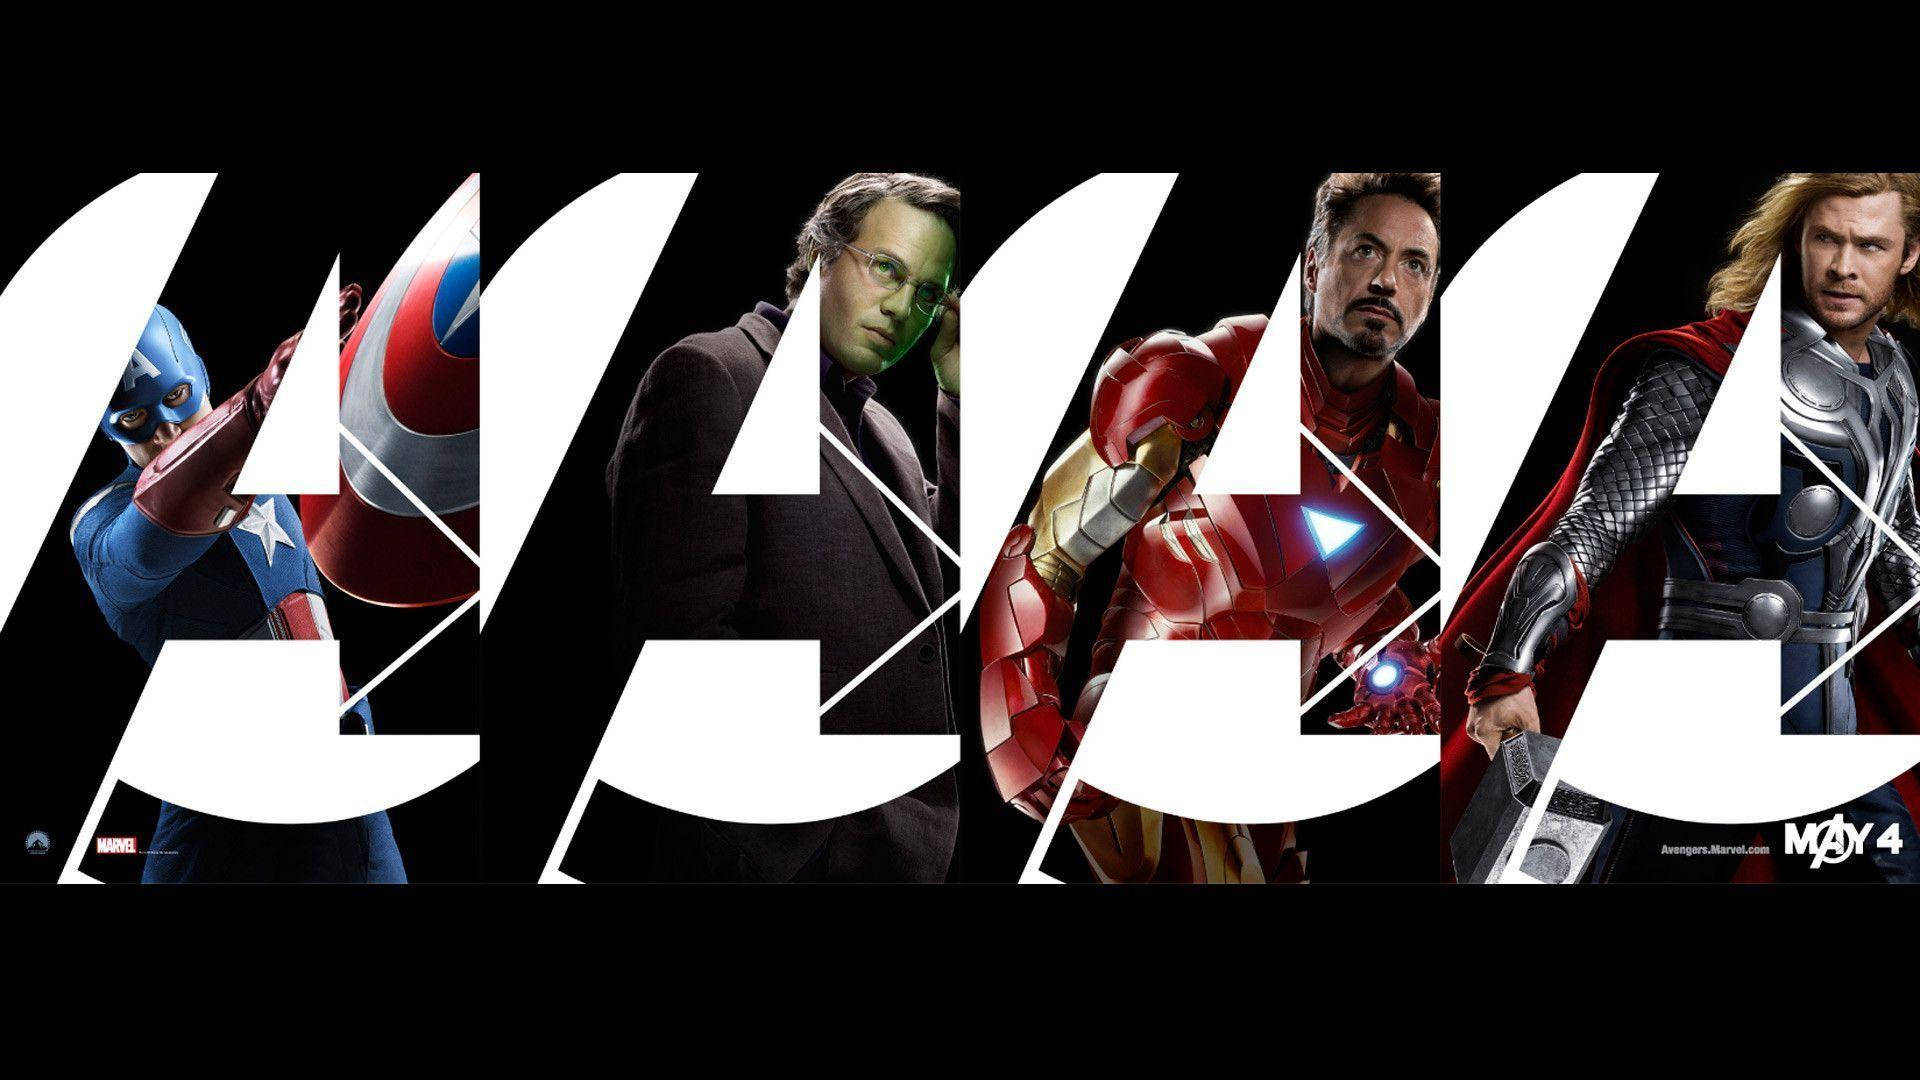 Top 999+ Best Avengers Wallpapers Full HD, 4K✅Free to Use